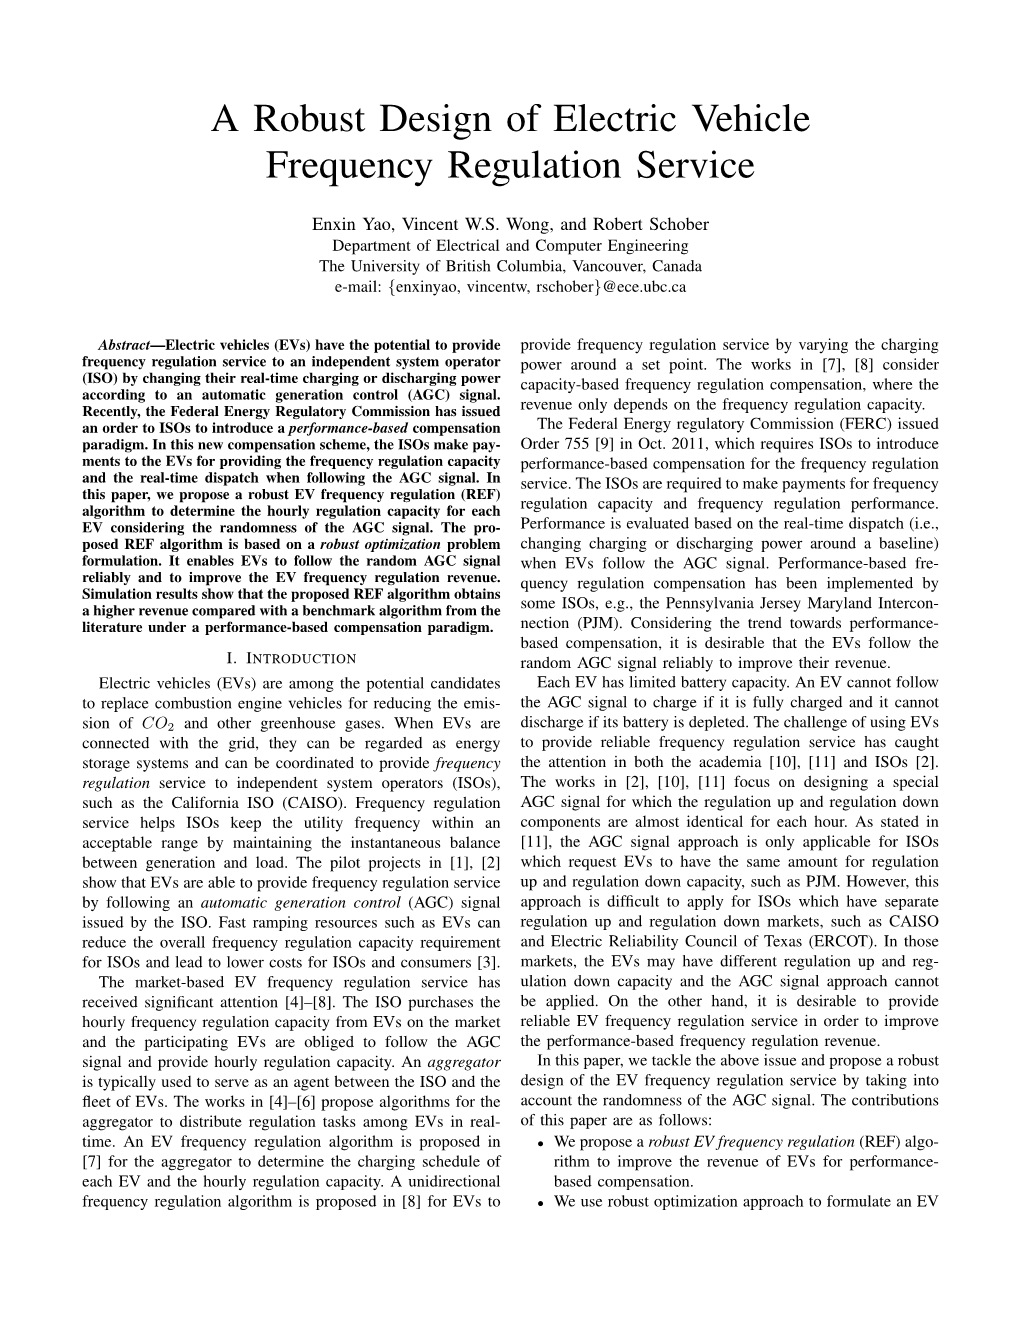 A Robust Design of Electric Vehicle Frequency Regulation Service